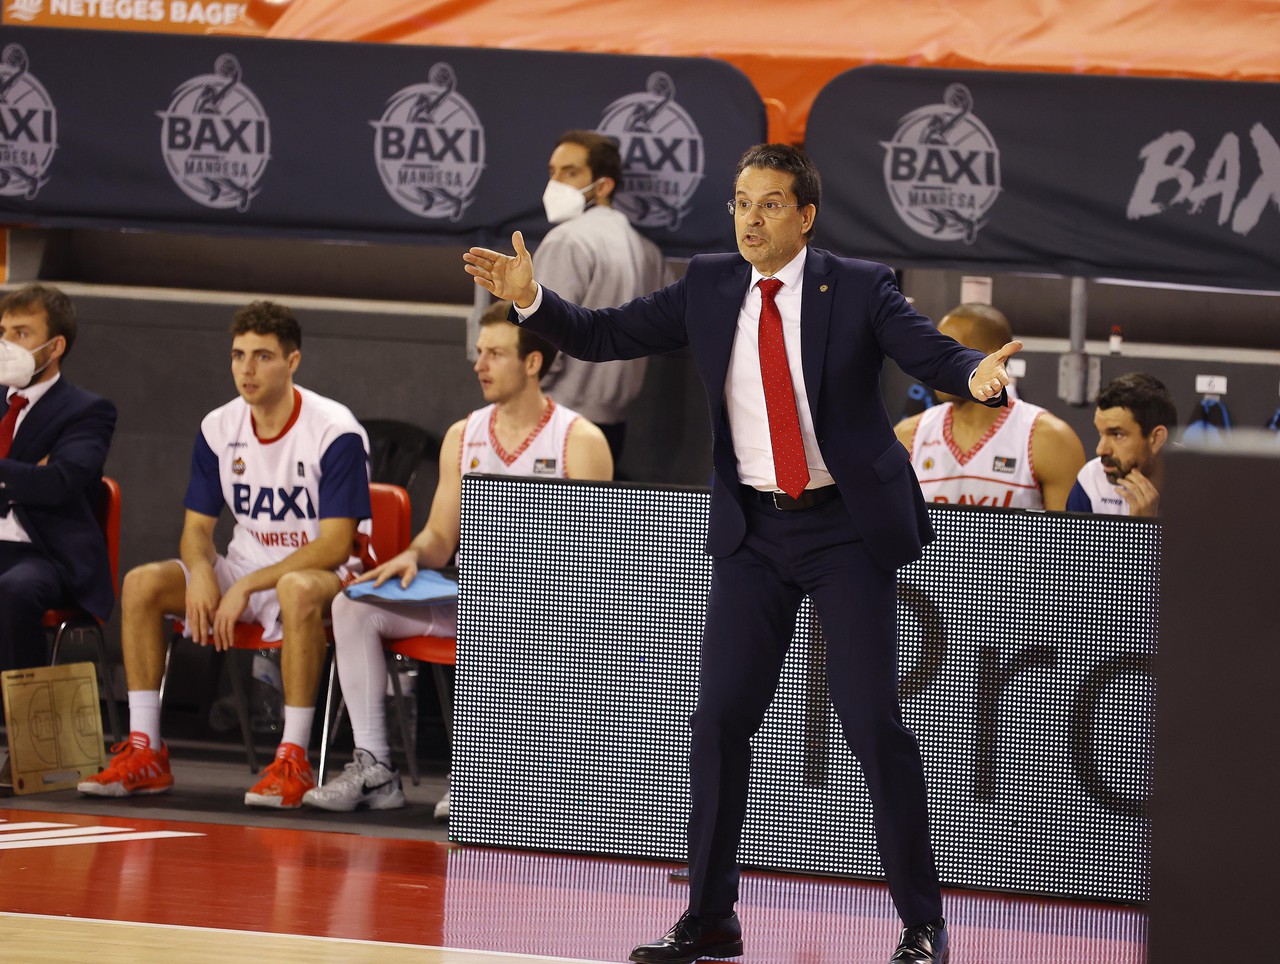 BAXI Manresa expects a tough match in Fuenlabrada's visit to Congost